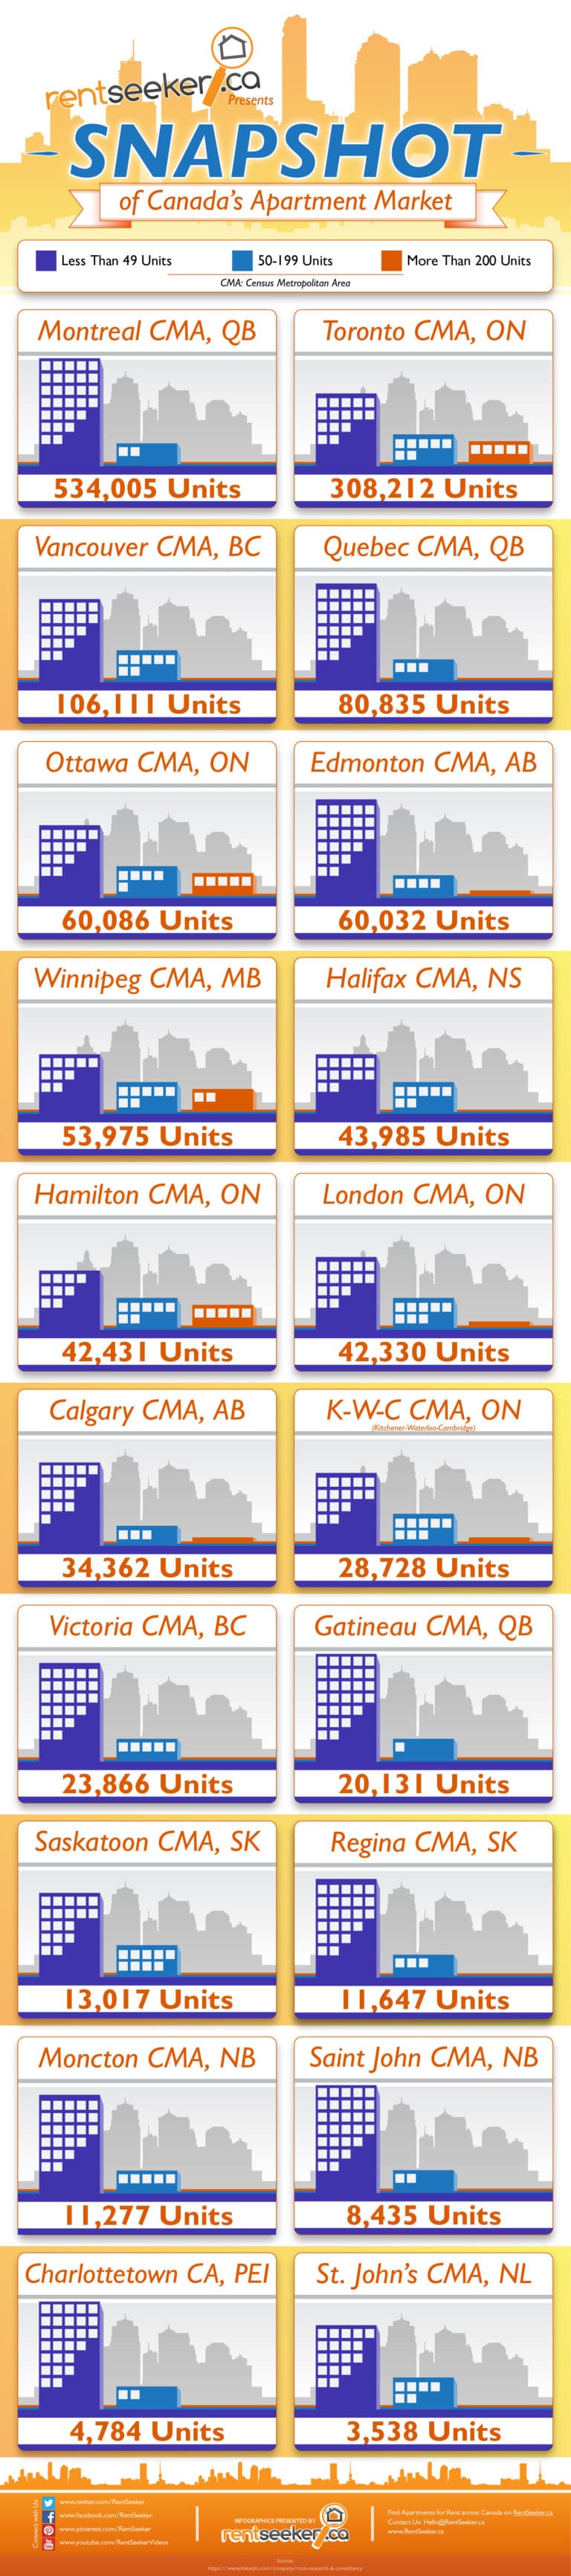 A Snapshot of Canada's Apartment Market